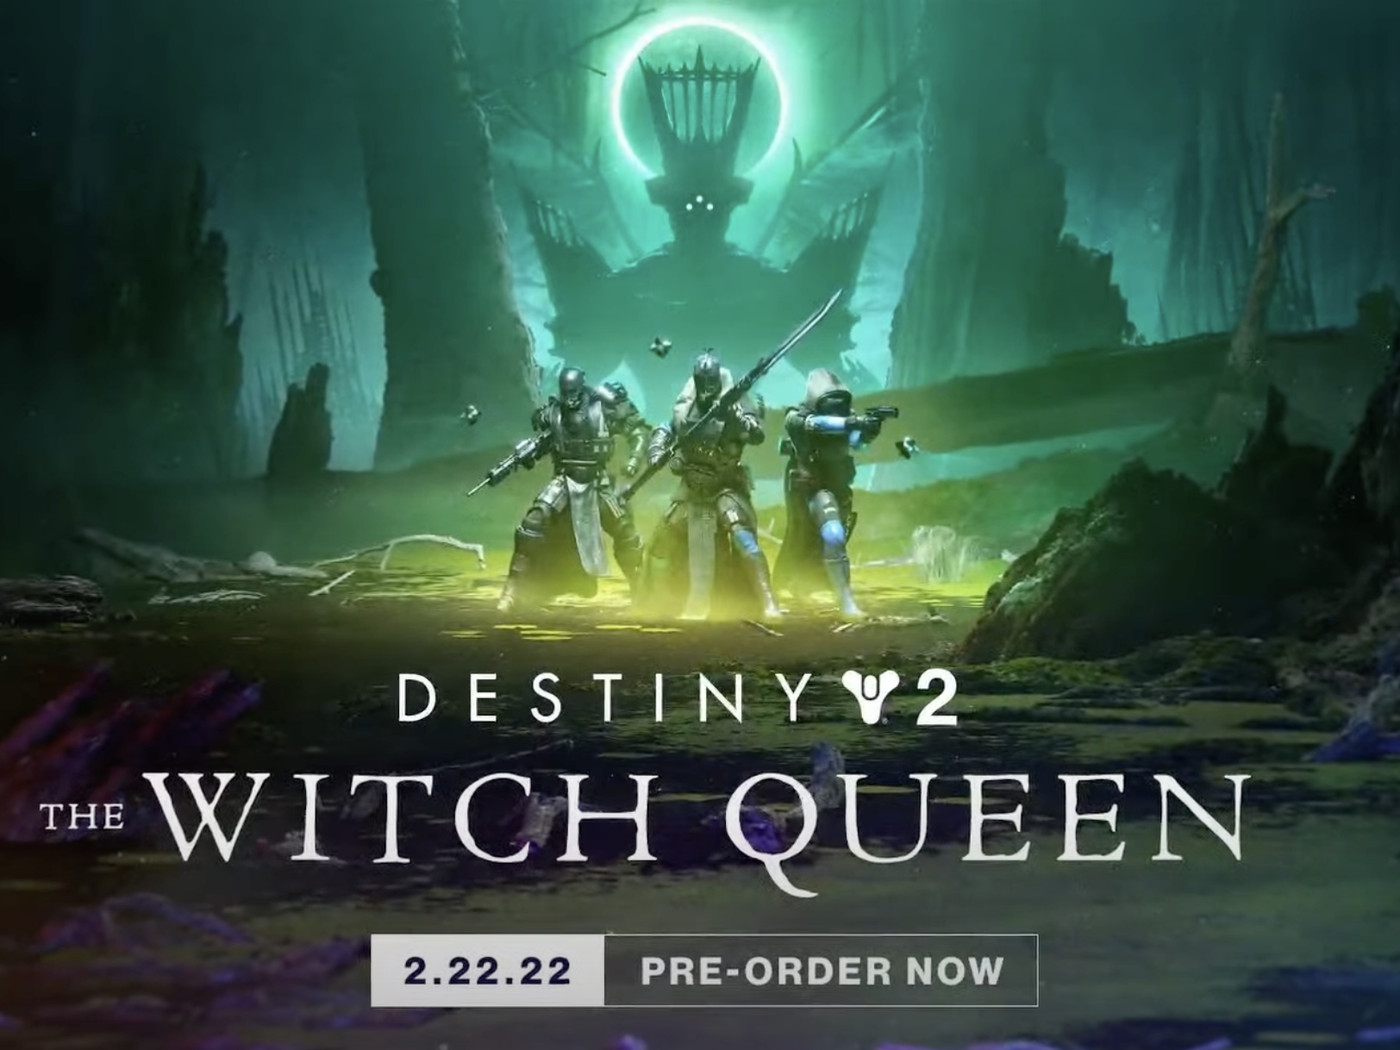 Destiny 2 The Witch Queen Wallpaper 4K Bungie 2022 Games 6343